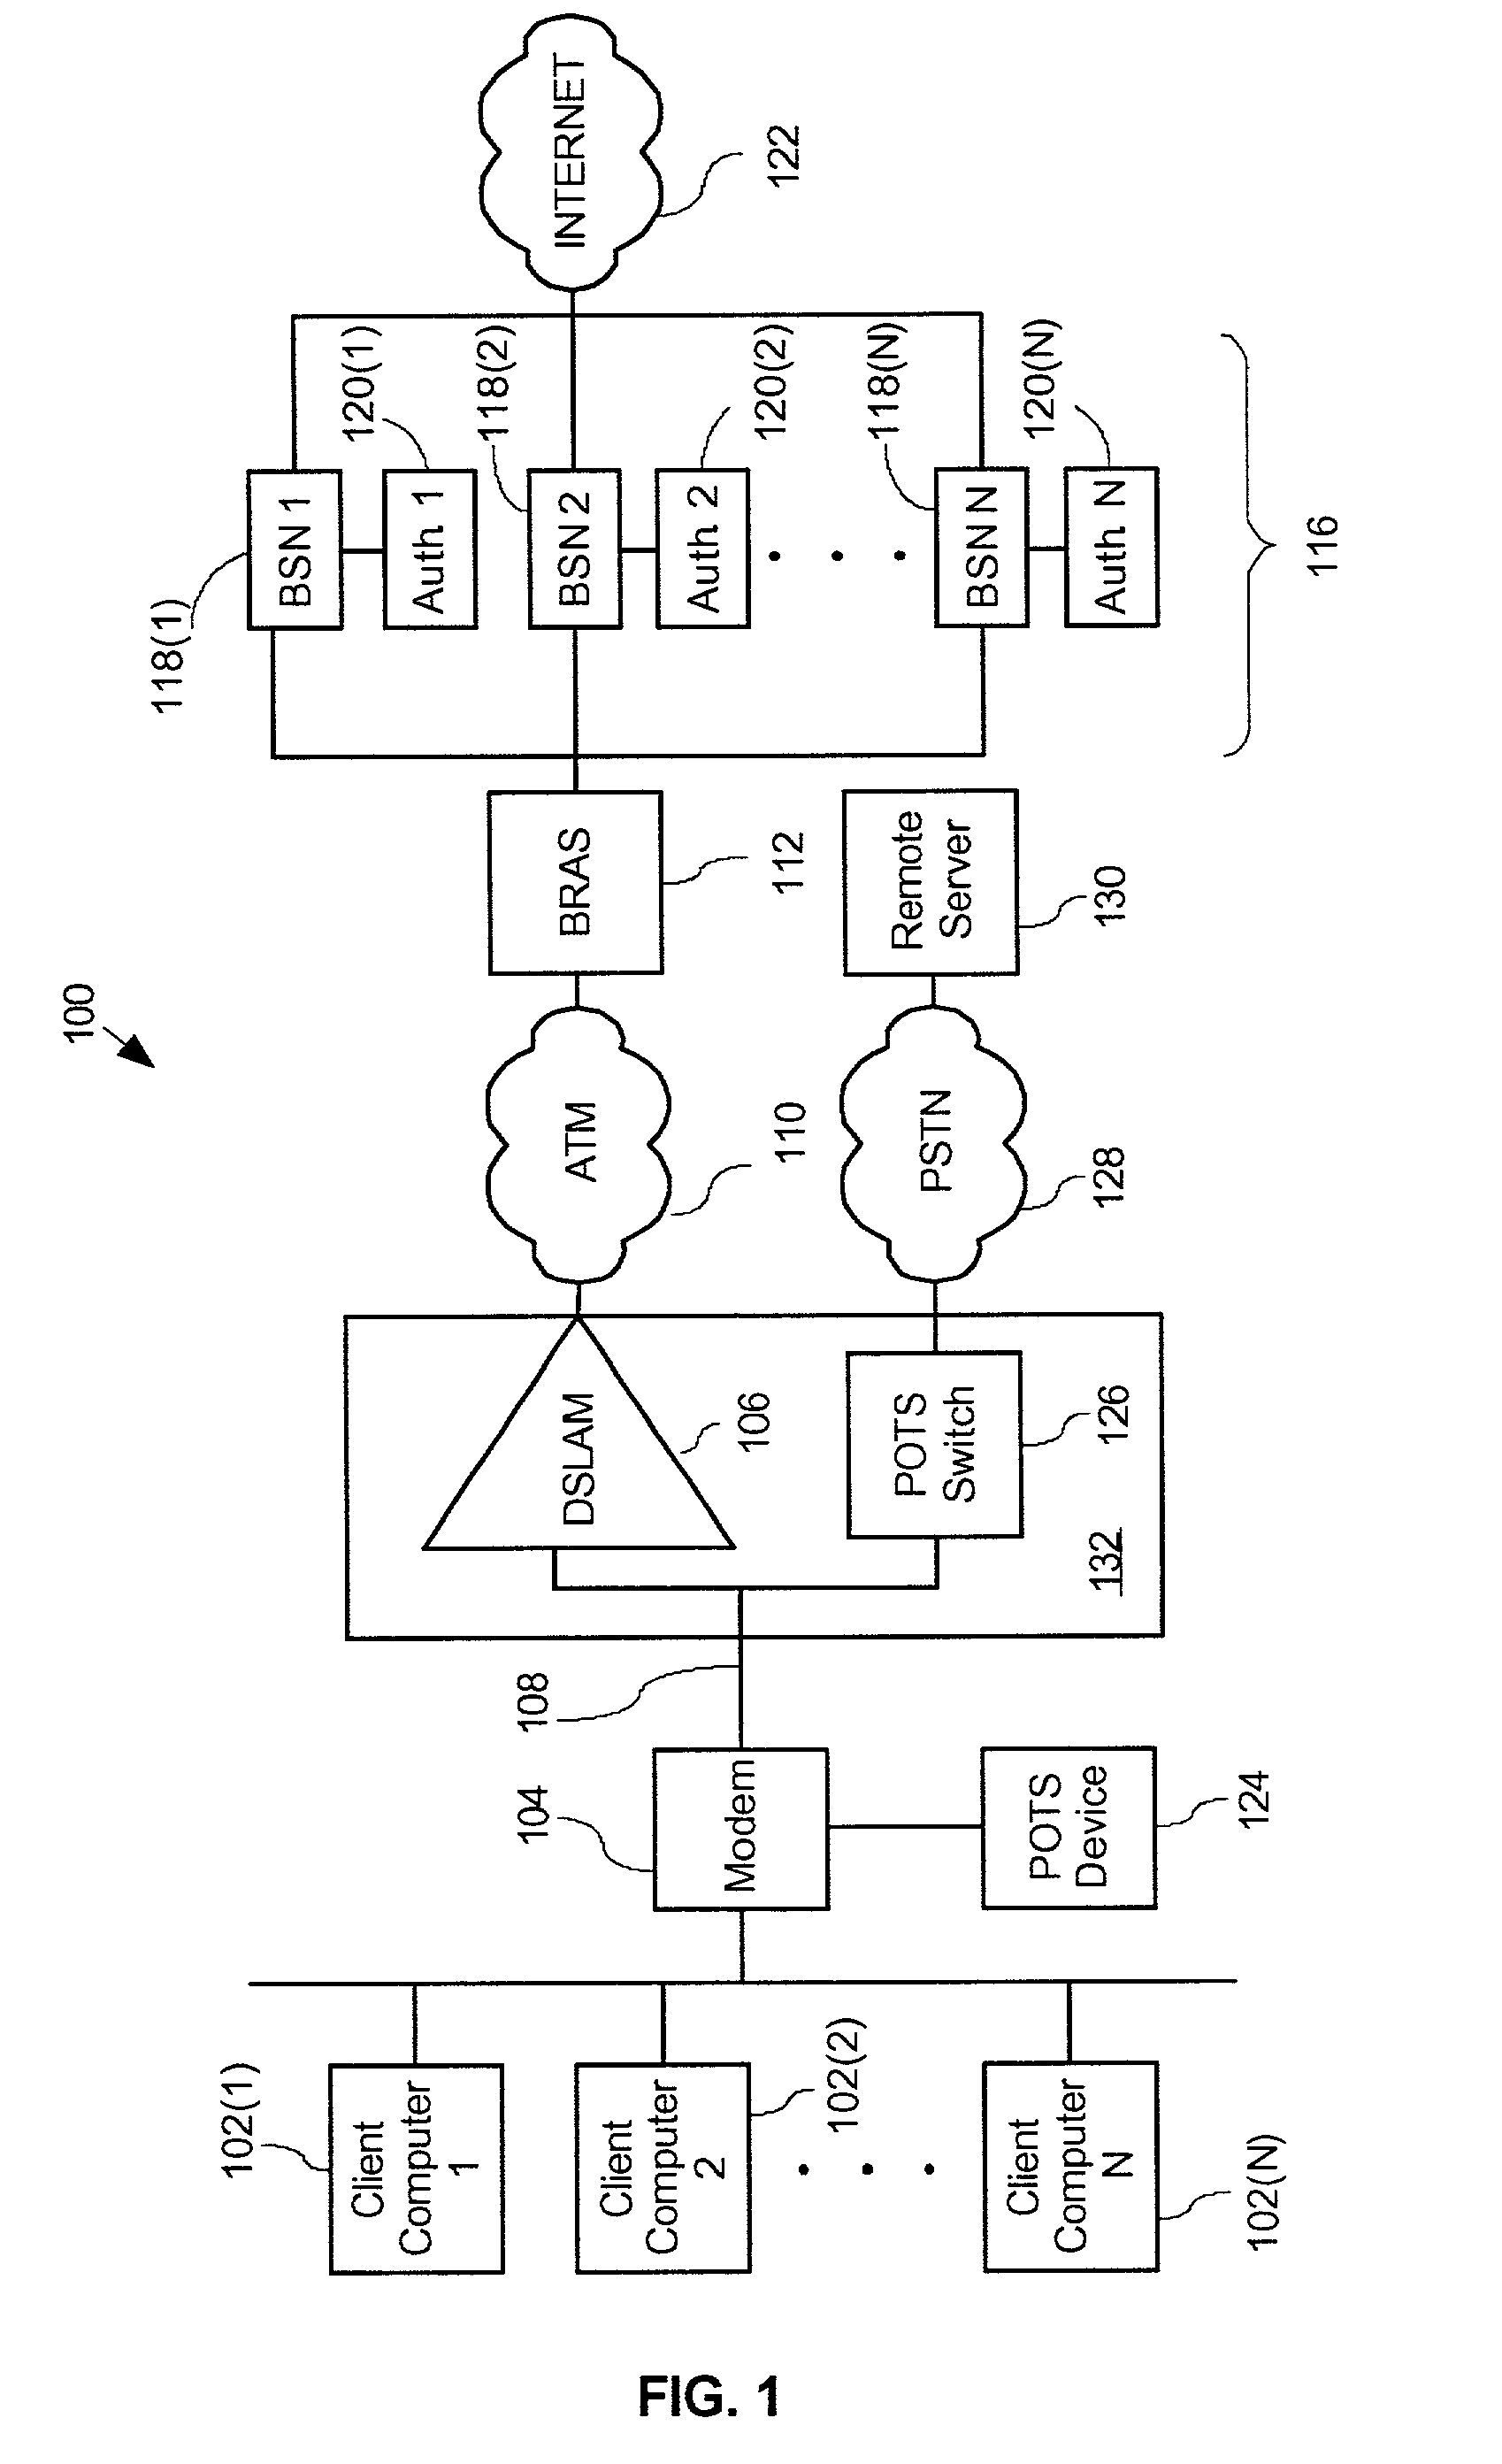 System and method for provisioning broadband service in a PPPoE network using DTMF communication